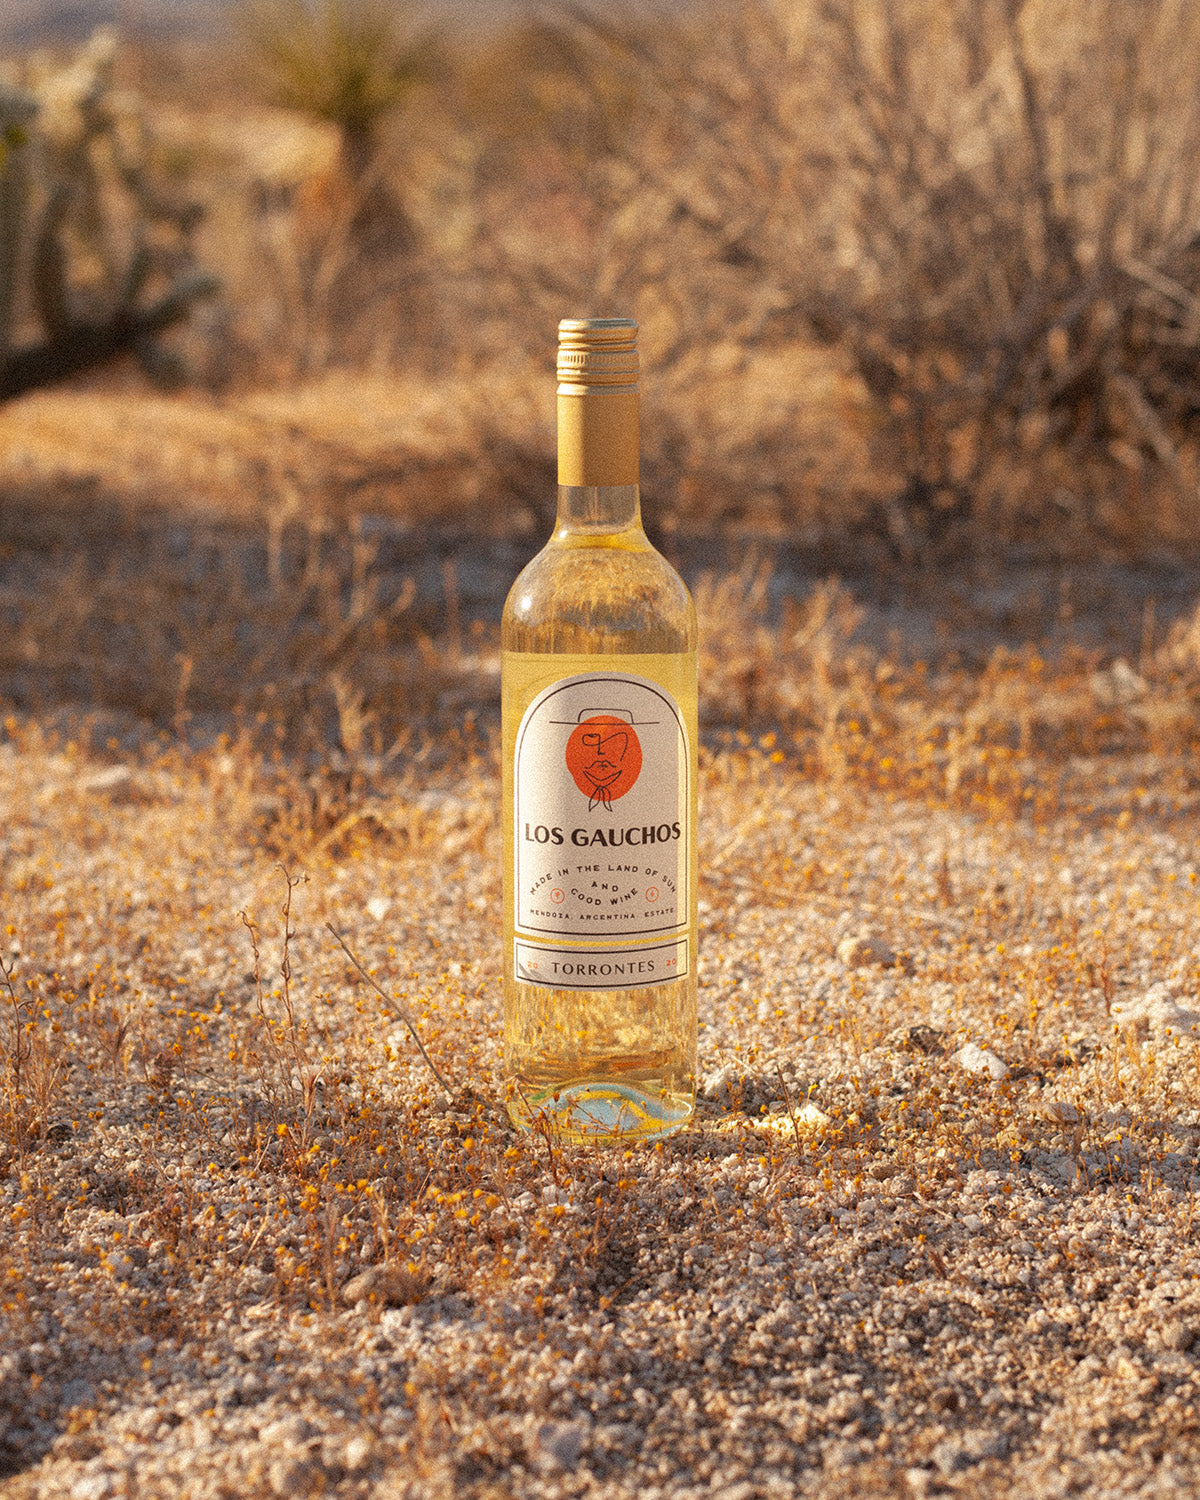 Featured product image displaying Los Gaucho's Torrontes